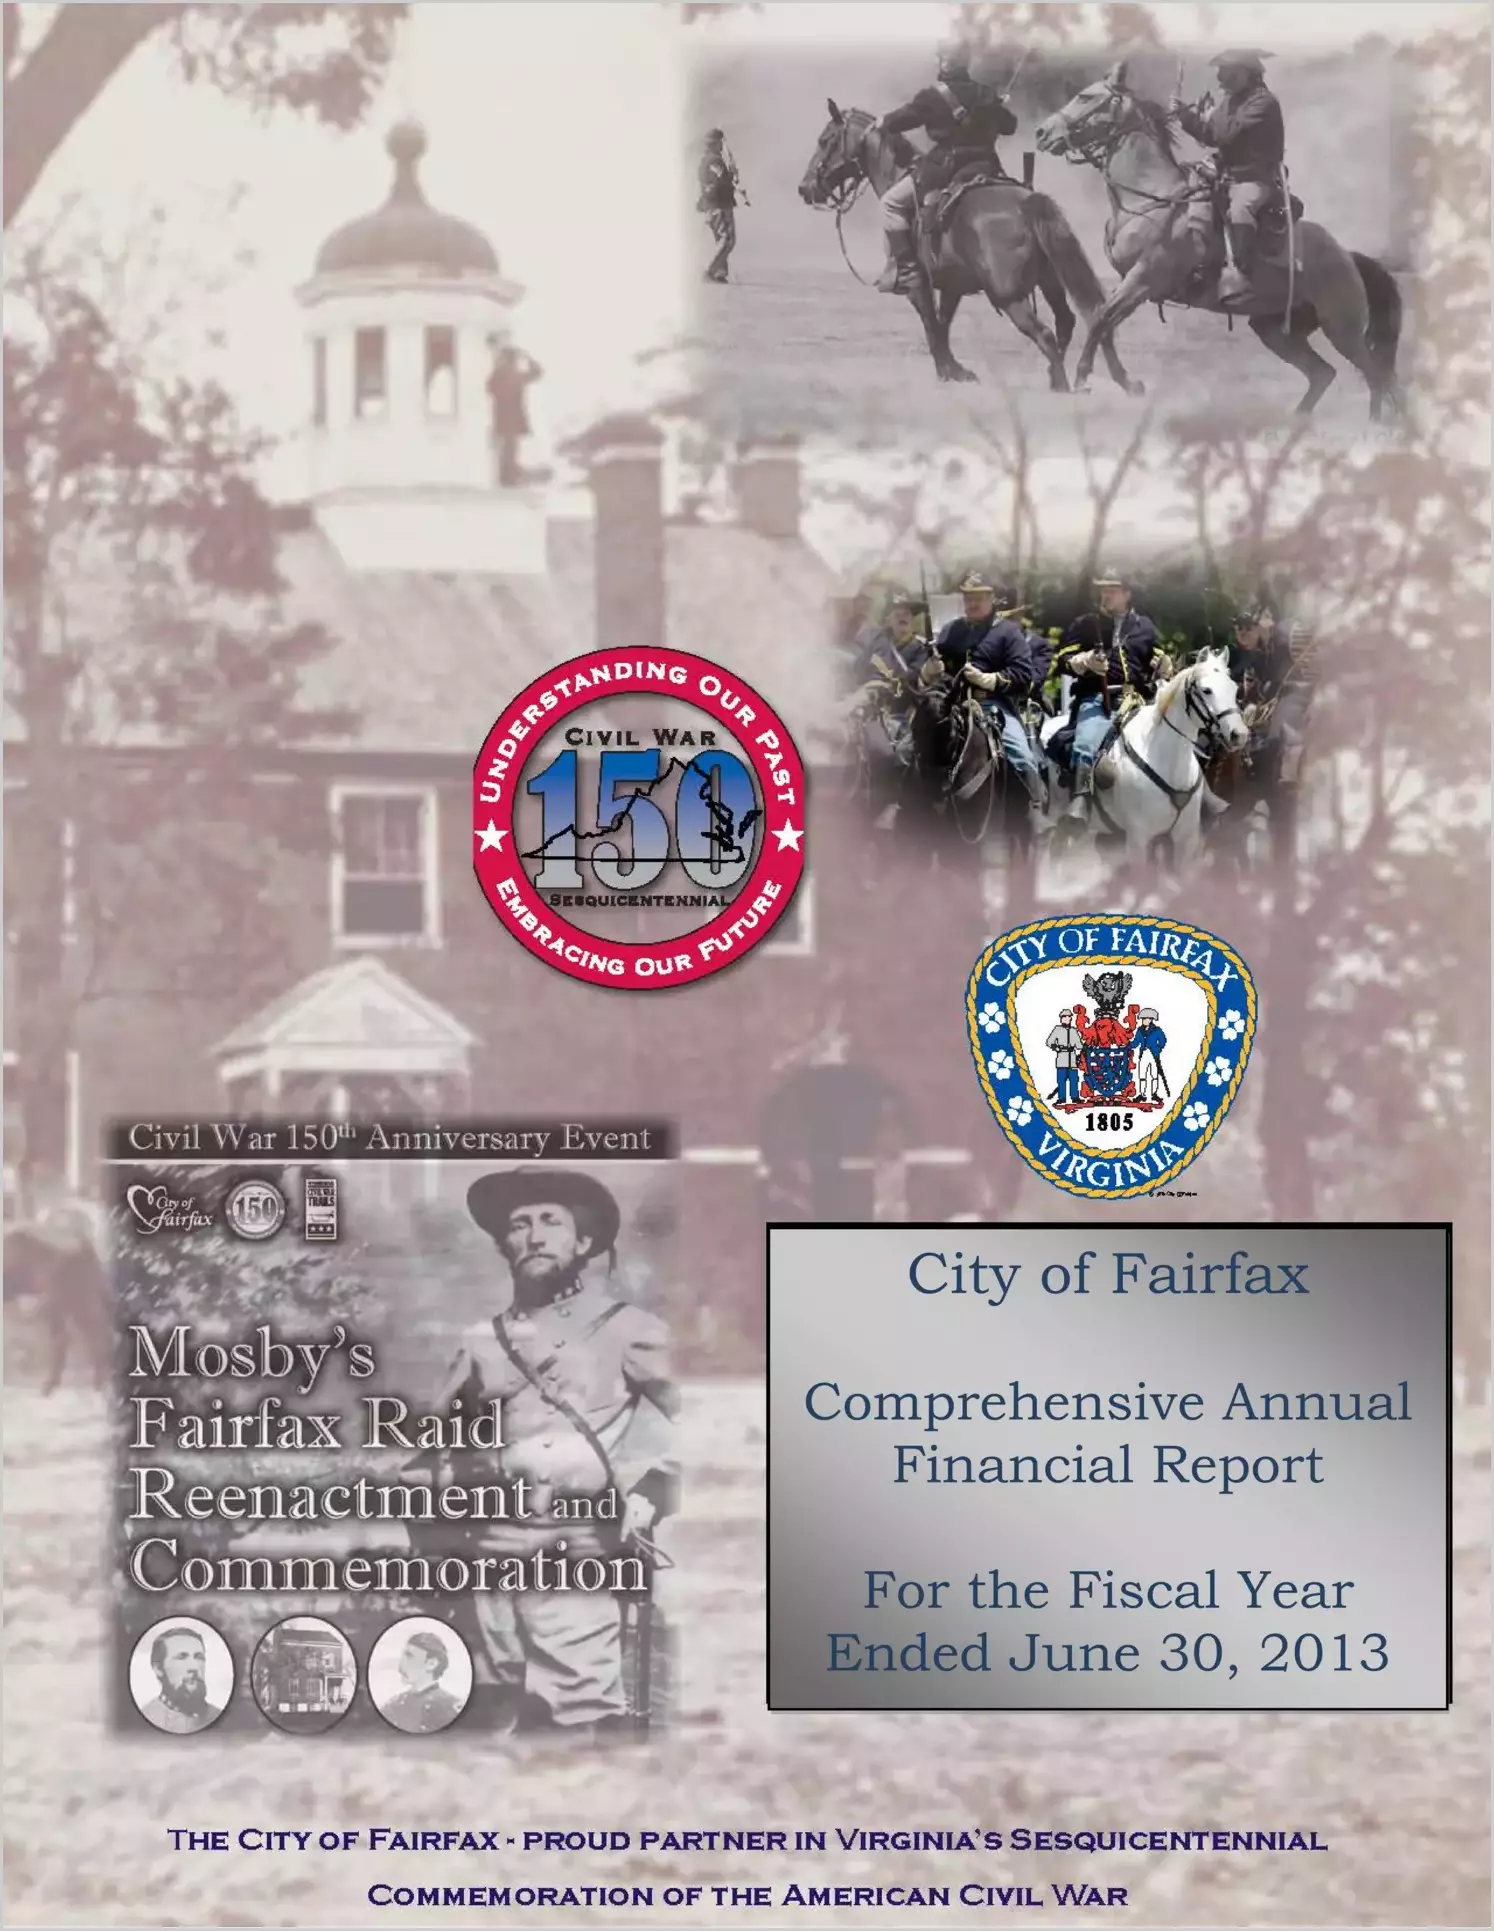 2013 Annual Financial Report for City of Fairfax